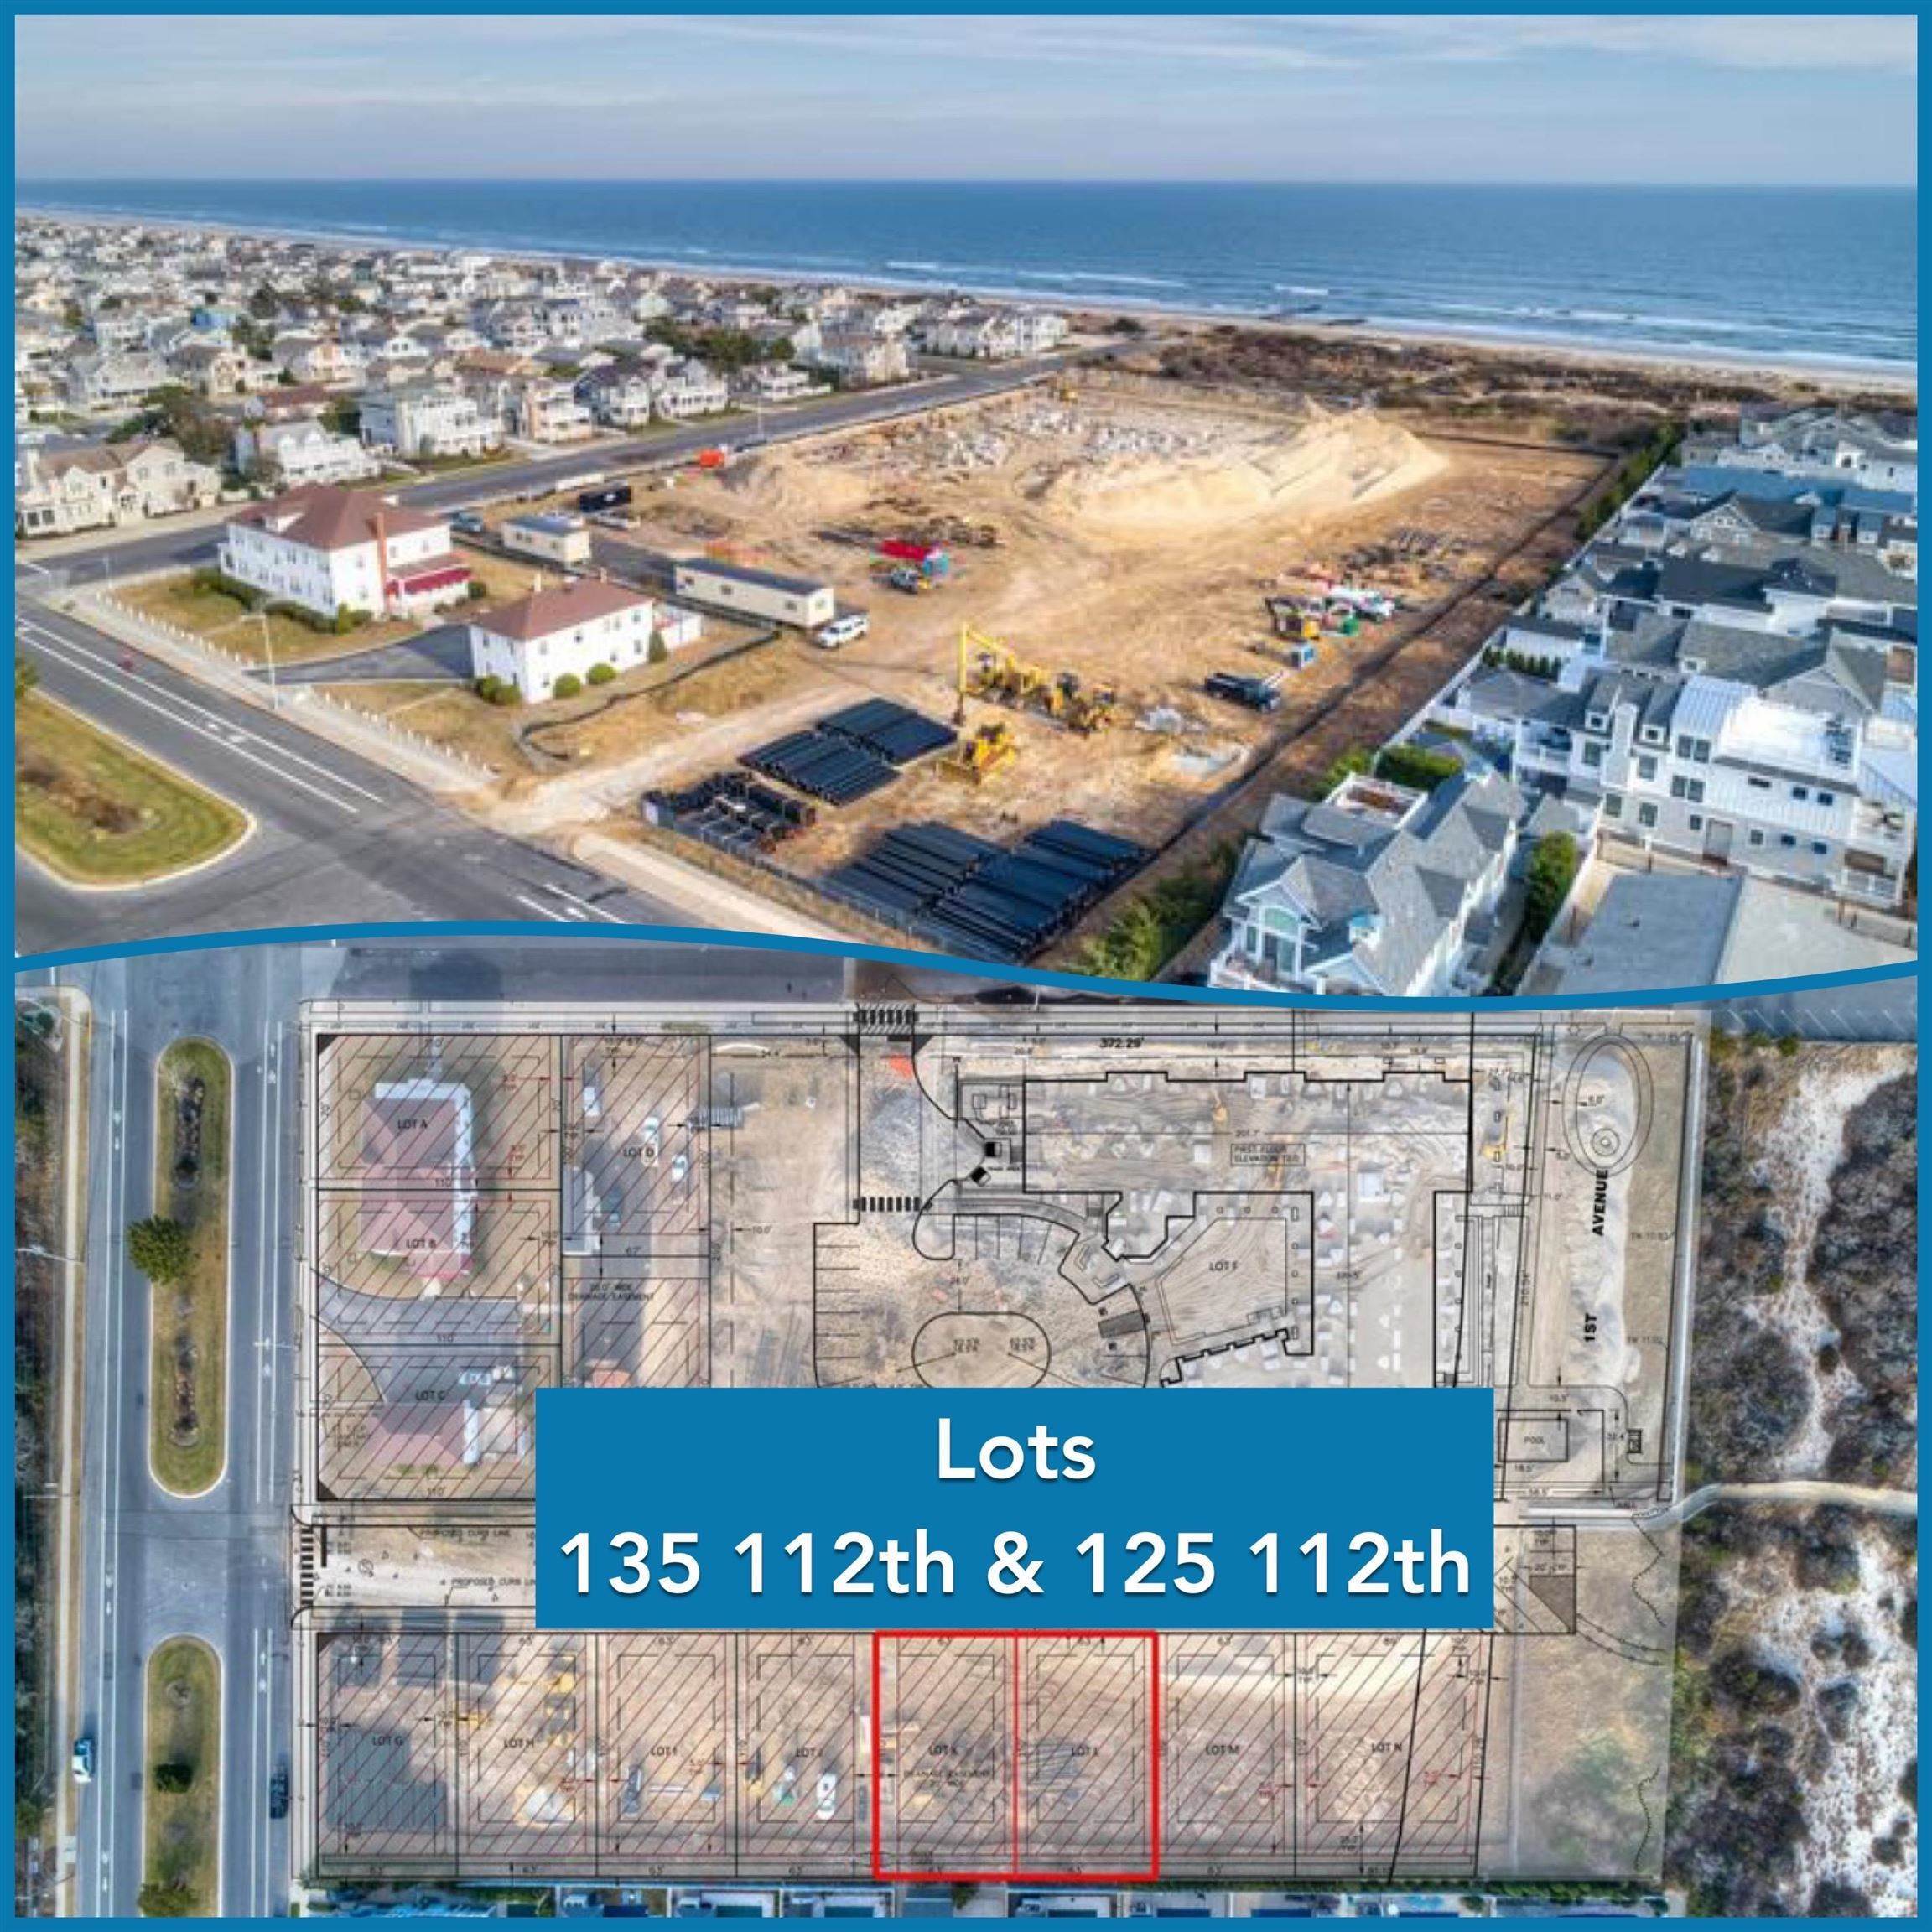 Land for Sale at 125 112th Street Stone Harbor, New Jersey 08247 United States